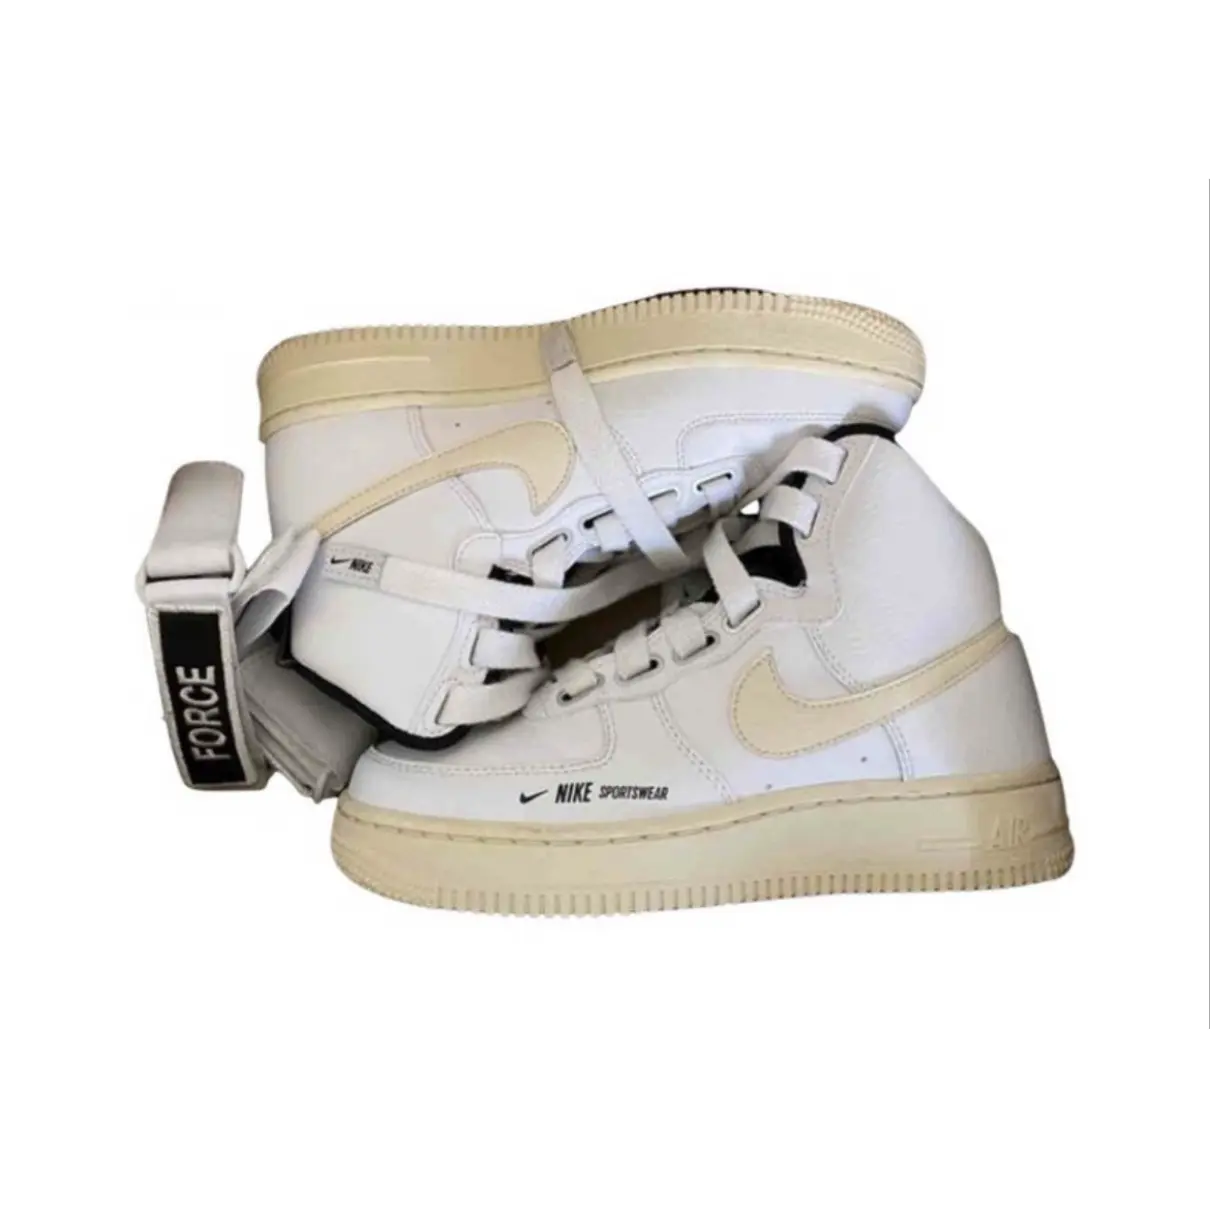 Buy Nike Air Force 1 leather trainers online - Vintage